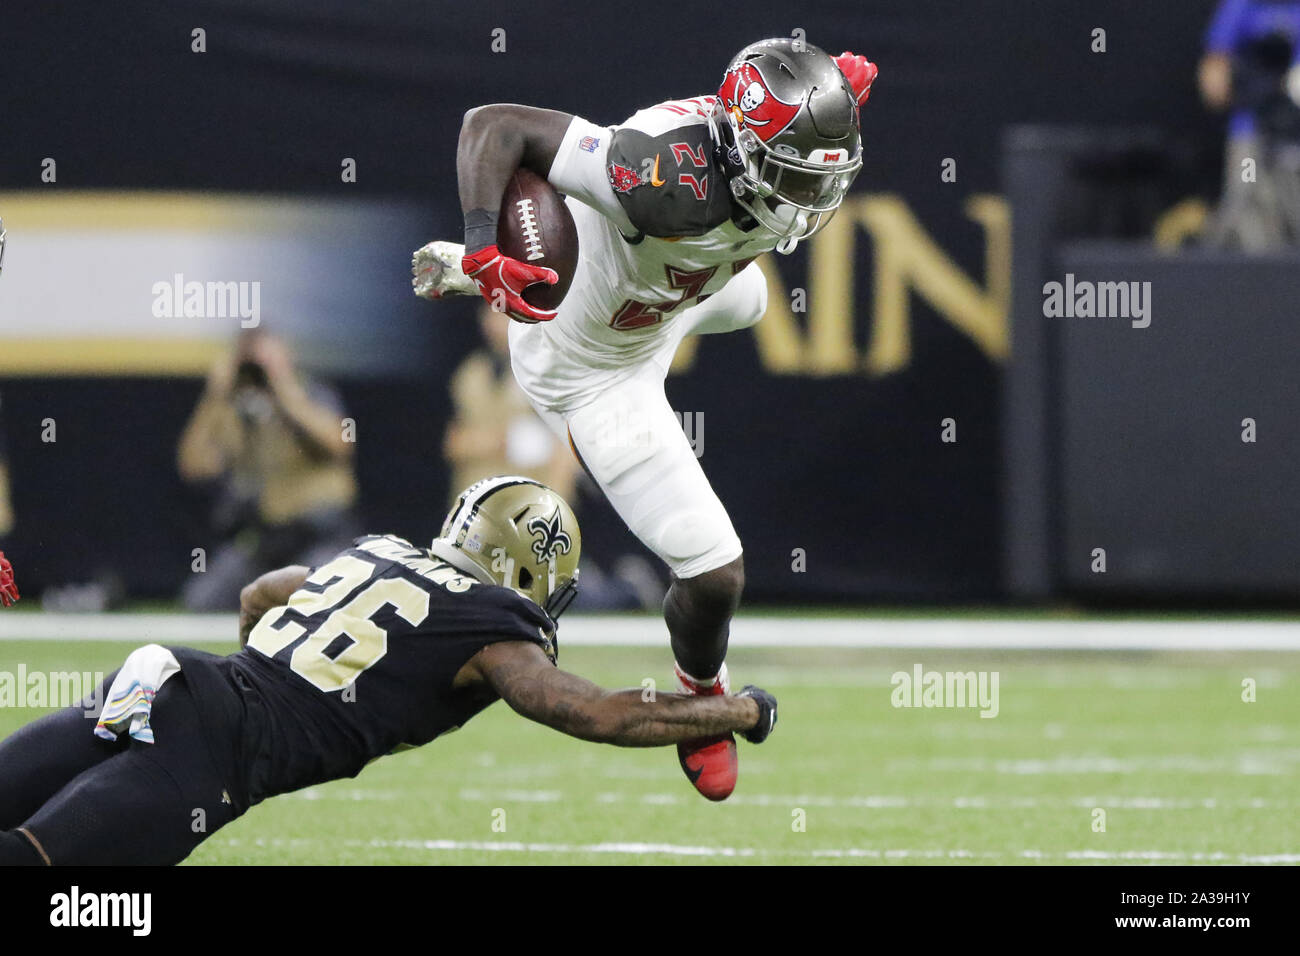 New Orleans, LOUISIANA, USA. 6th Oct, 2019. (left to right) New Orleans Saints cornerback P.J. Williams tackles Tampa Bay Buccaneers running back Ronald Jones in New Orleans, Louisiana USA on October 6, 2019. The Saints beat the Buccaneers 31-24. Credit: Dan Anderson/ZUMA Wire/Alamy Live News Stock Photo